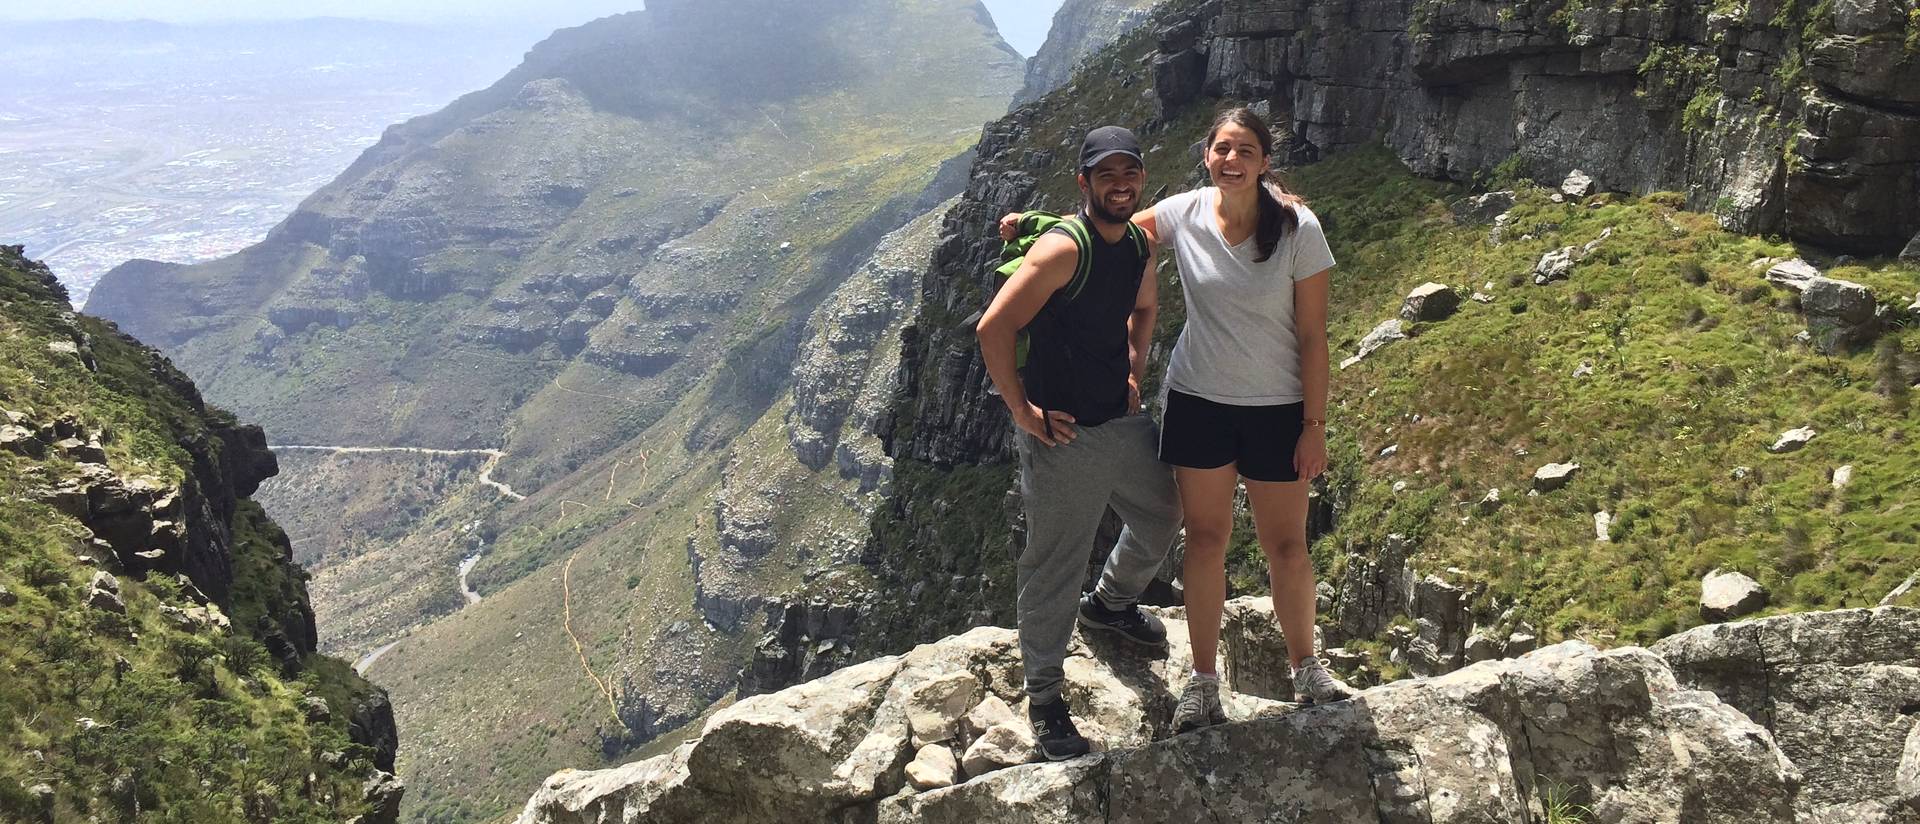 2015 Social work students abroad in Peru